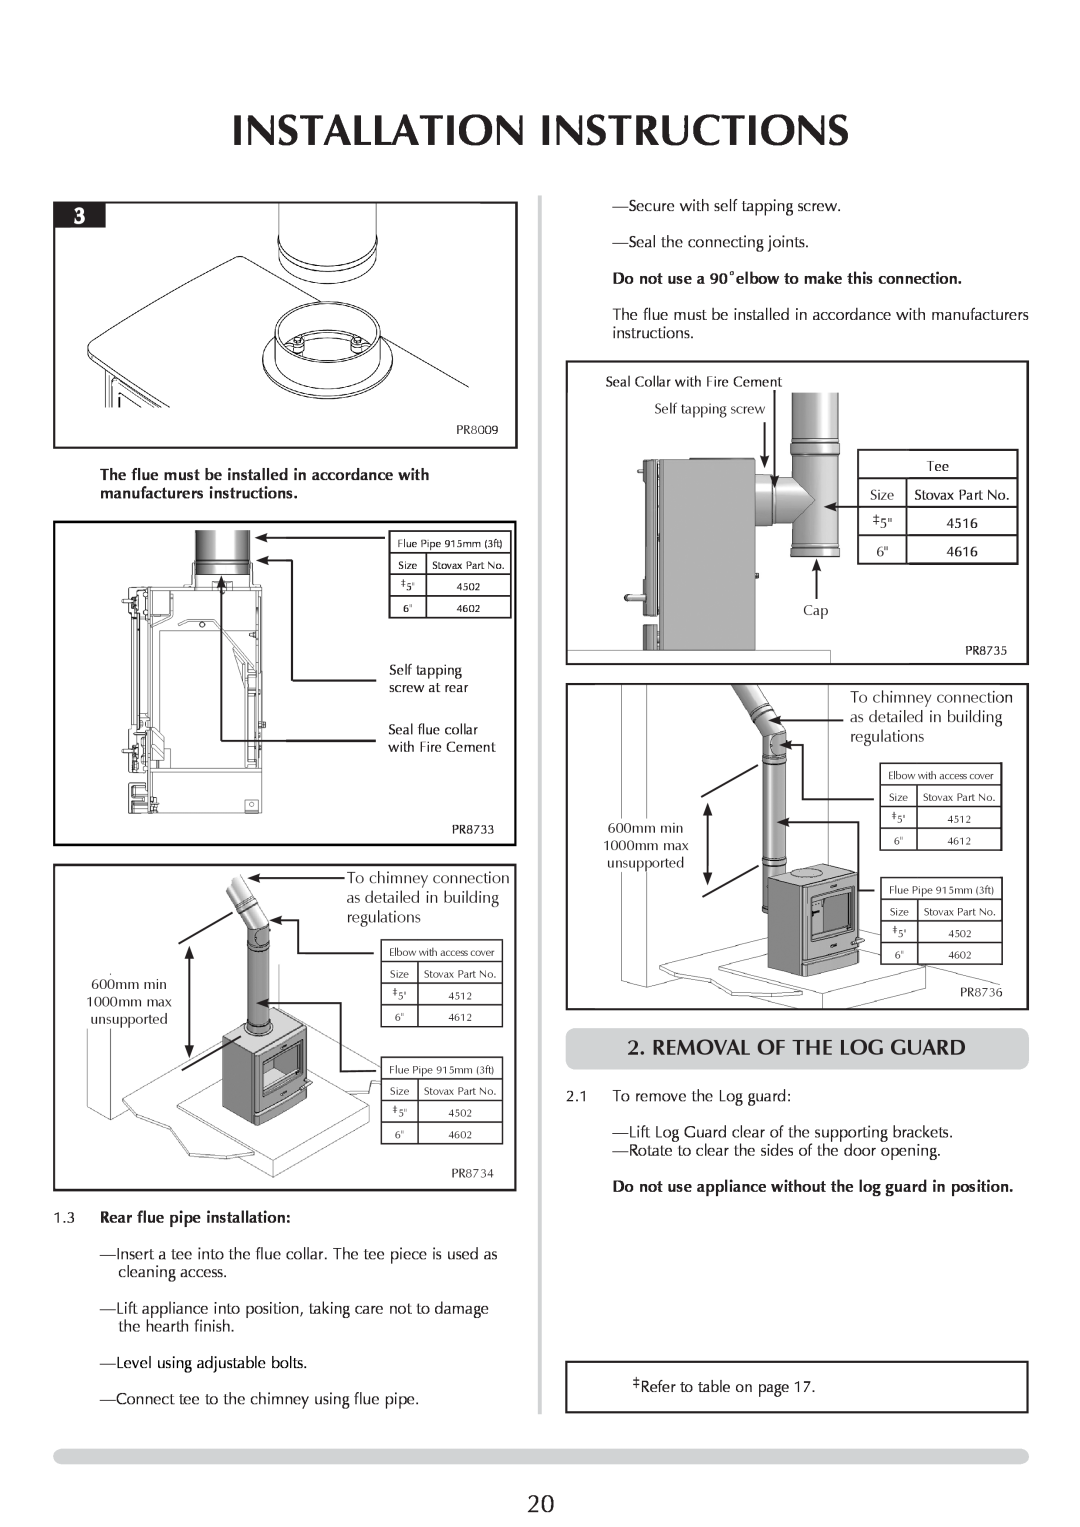 Yeoman YM-CL8W, YM-CL5W Removal Of The Log Guard, Installation Instructions, Do not use a 90˚elbow to make this connection 